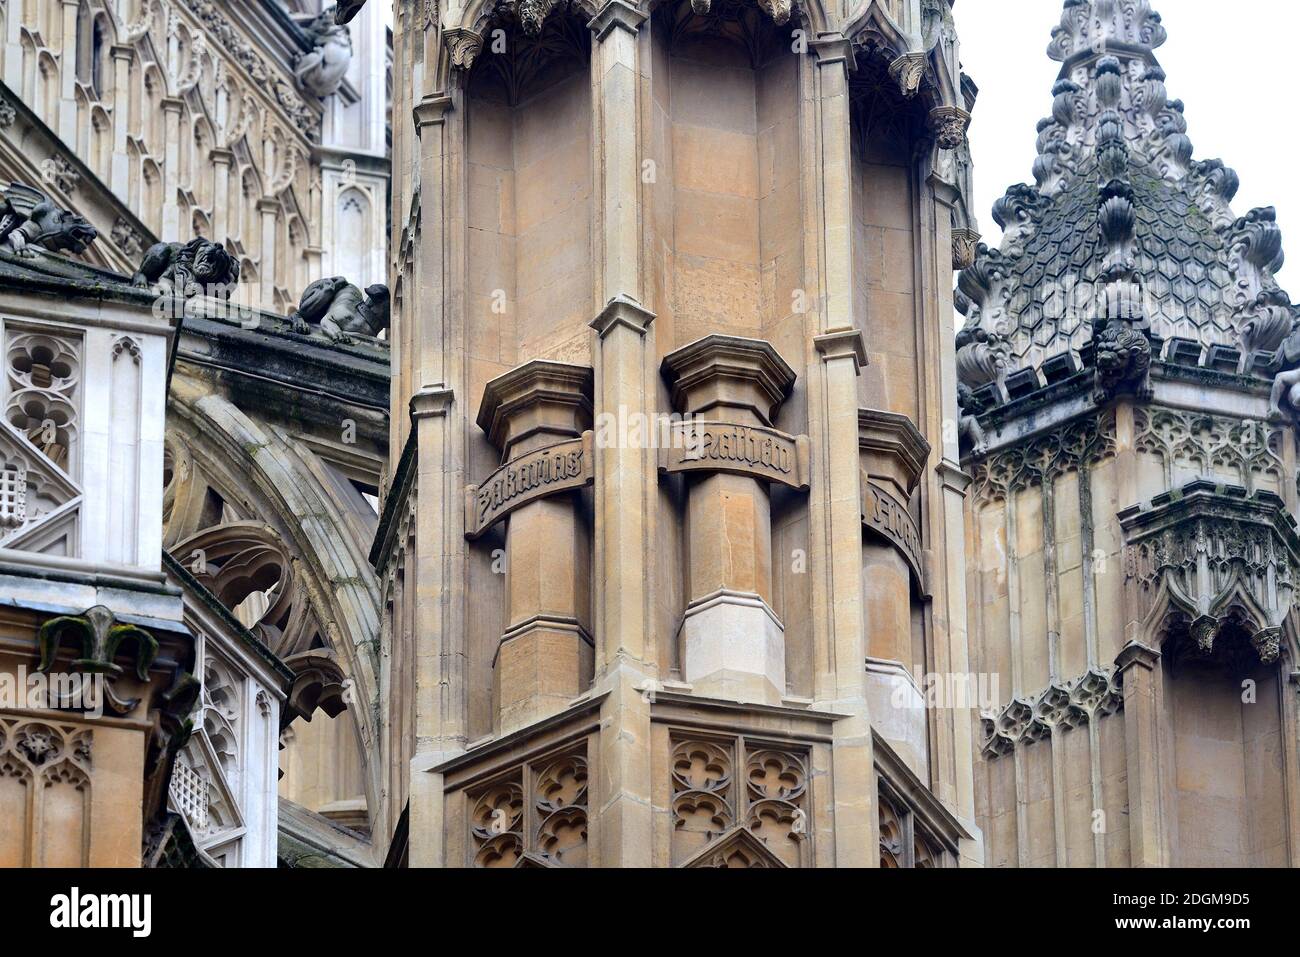 London, England, UK. Westminster Abbey: detail of the exterior of Henry VII Chapel. Empty plinths originally inhabited by statues, which by the 1700.. Stock Photo